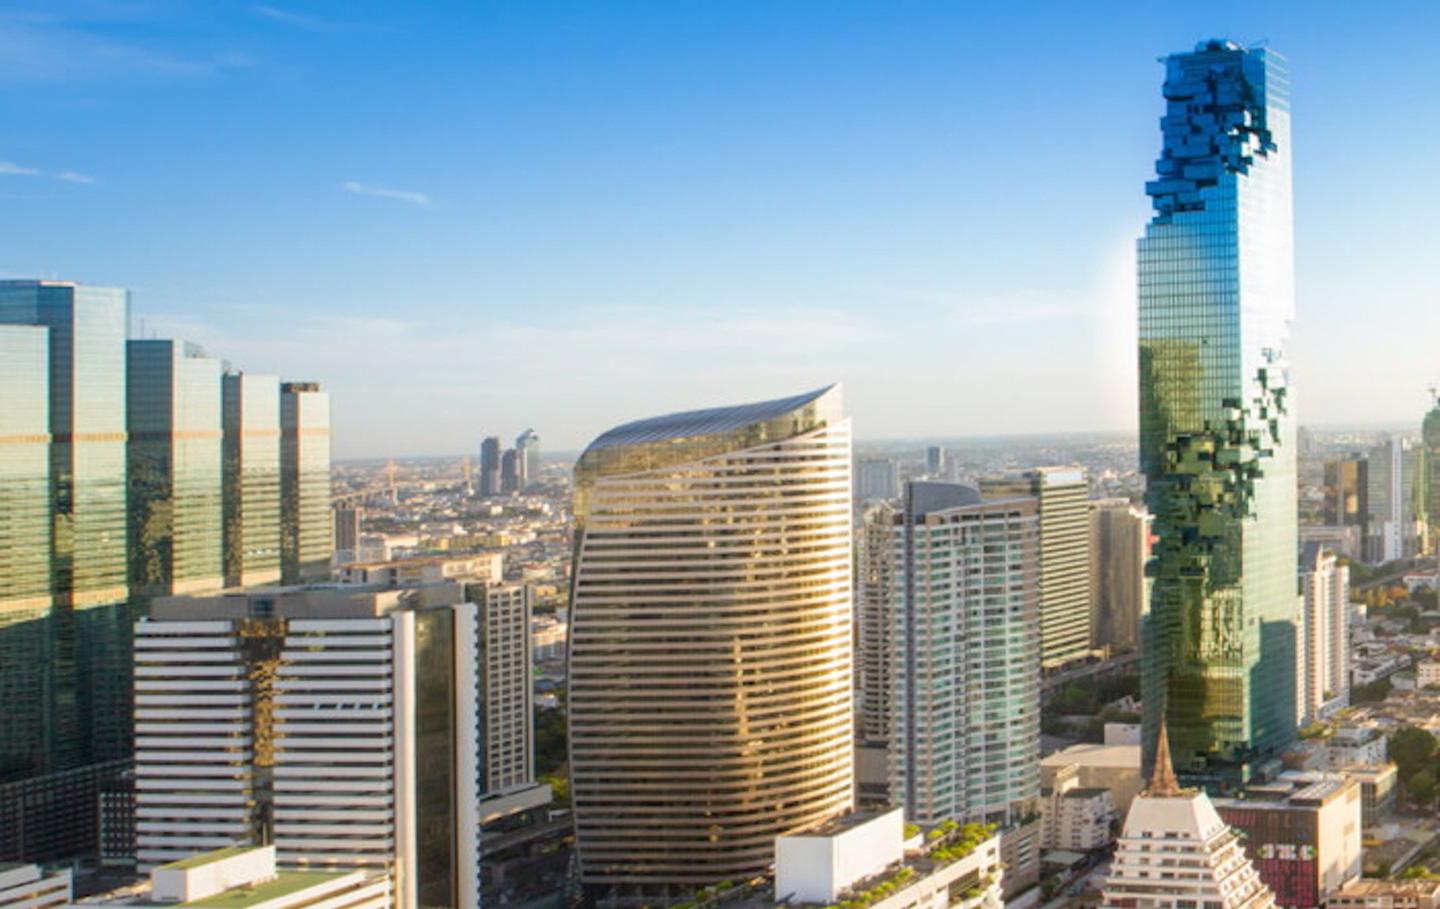 King Power Mahanakhon Building is a visual landmark thanks to its dramatic exterior, which is encased in a glass curtain with cuboid spiral cut-outs that give it a pixelated appearance / 